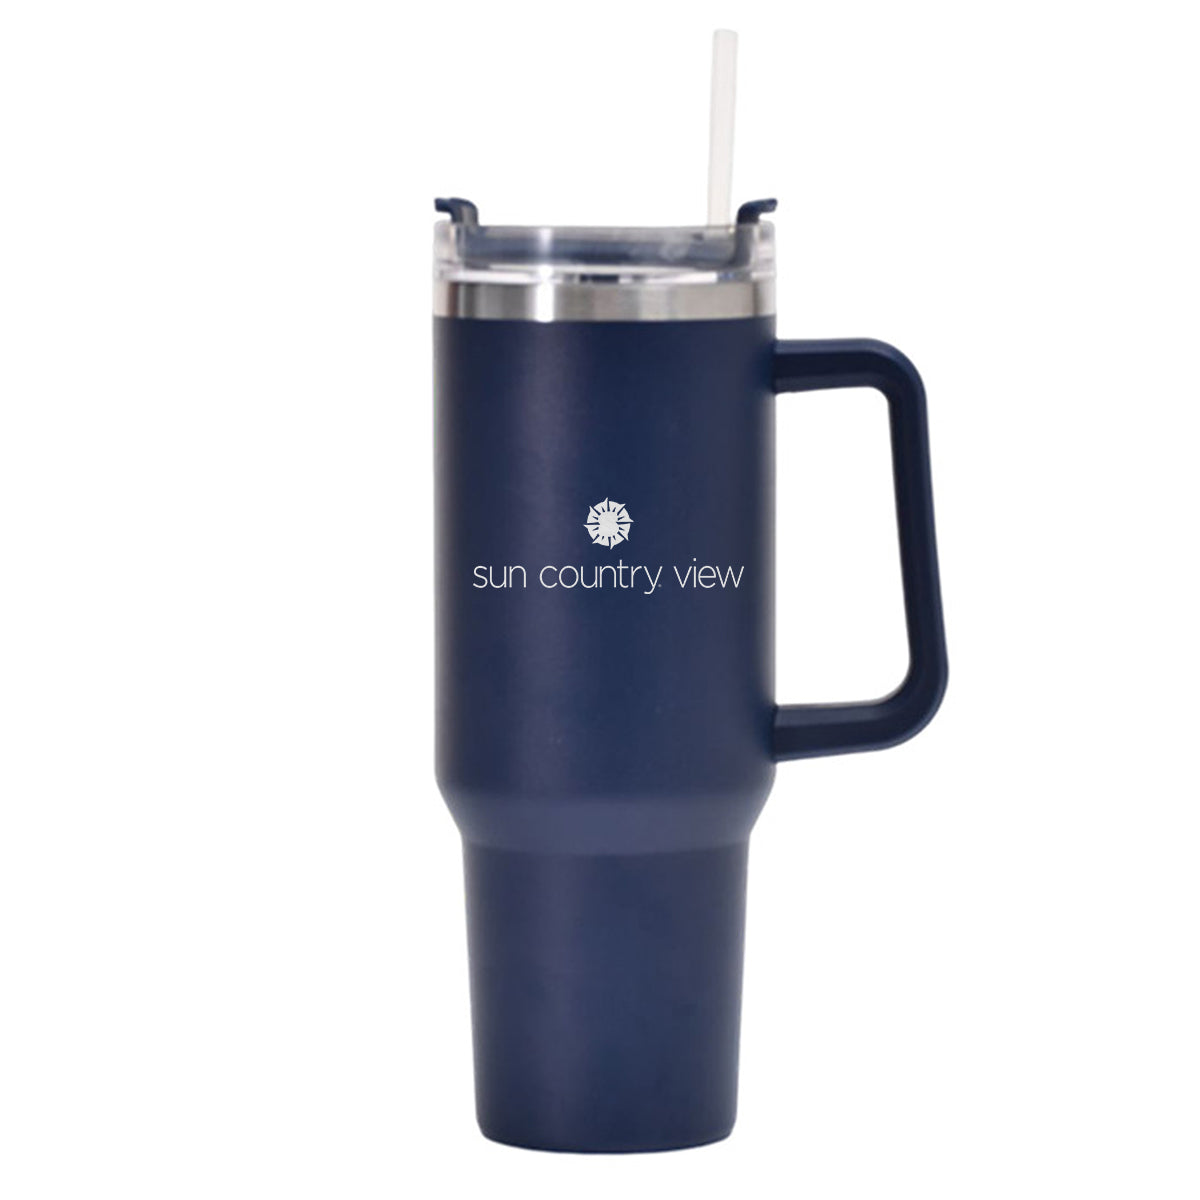 Sun Country Airlines Designed 40oz Stainless Steel Car Mug With Holder